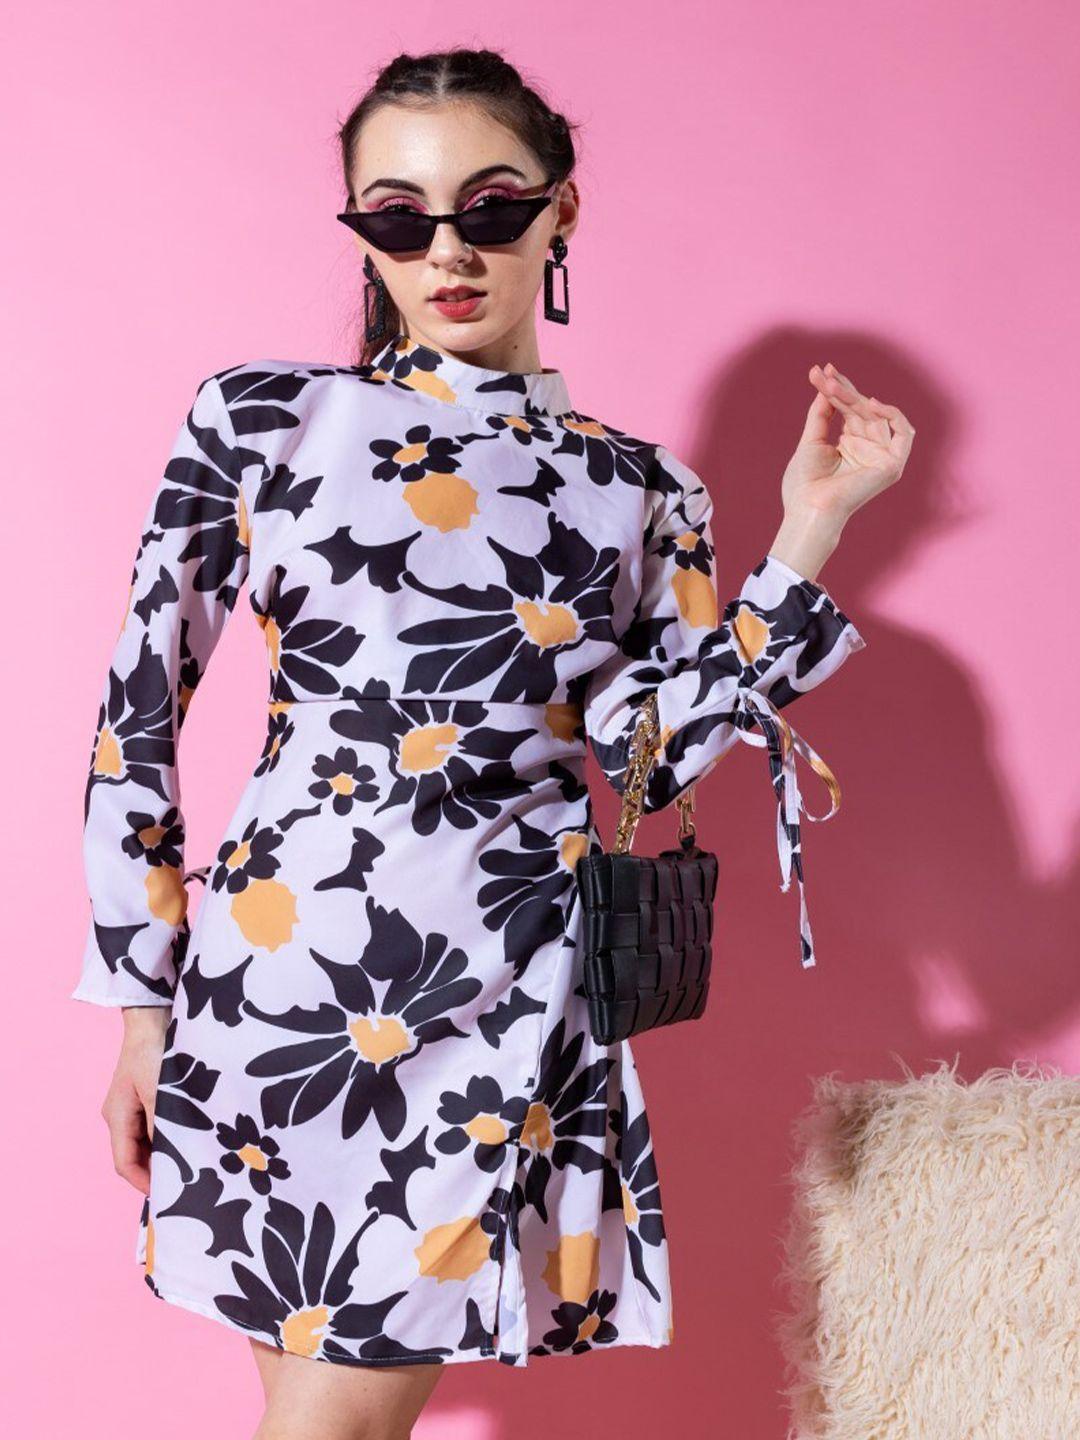 stylecast x hersheinbox off white & black floral printed high neck a-line dress